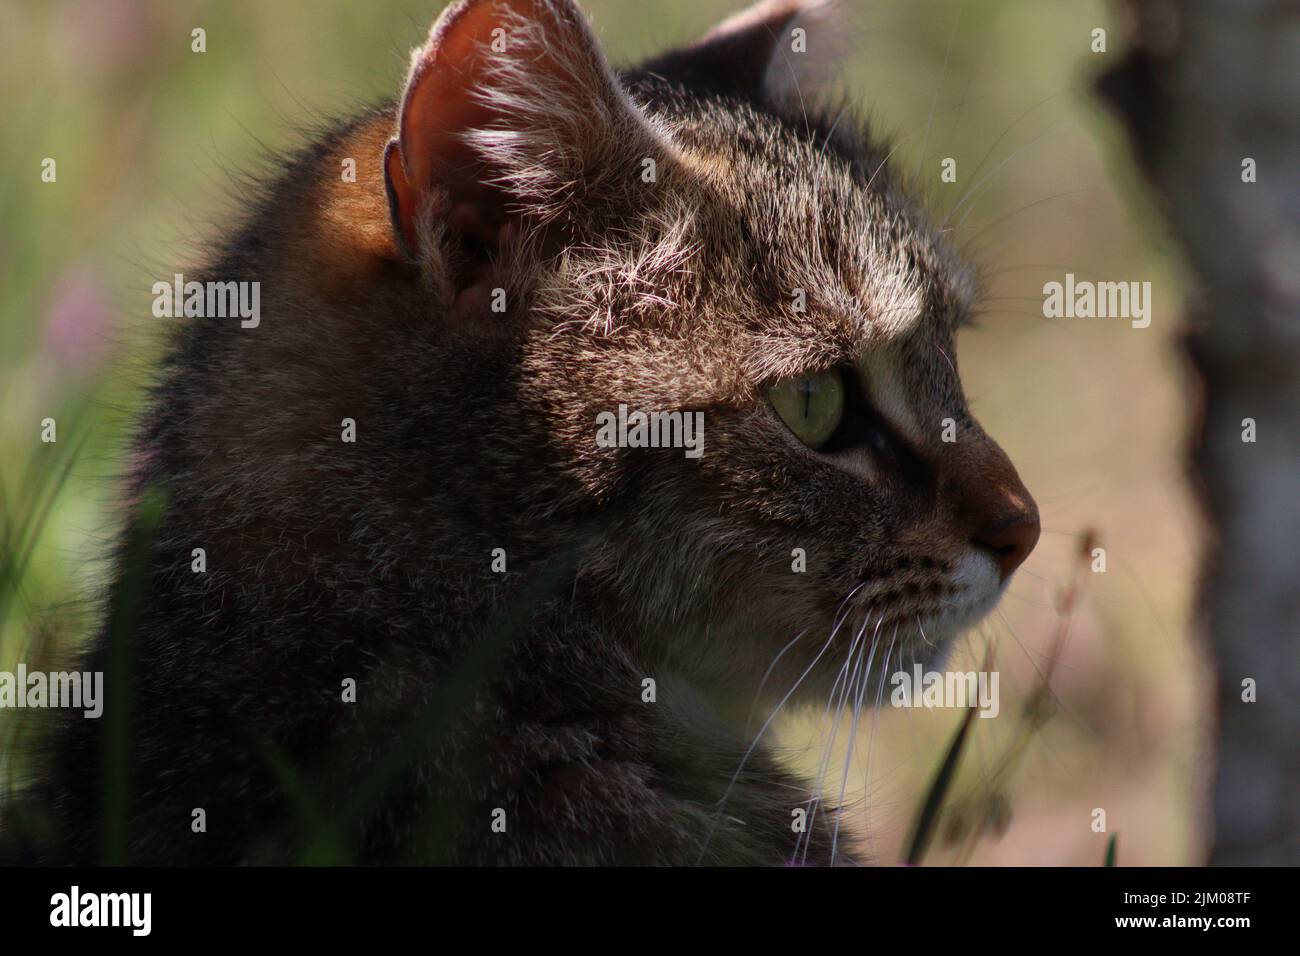 A shallow focus shot of a tabby cat's profile, blurred grass blades in the foreground Stock Photo